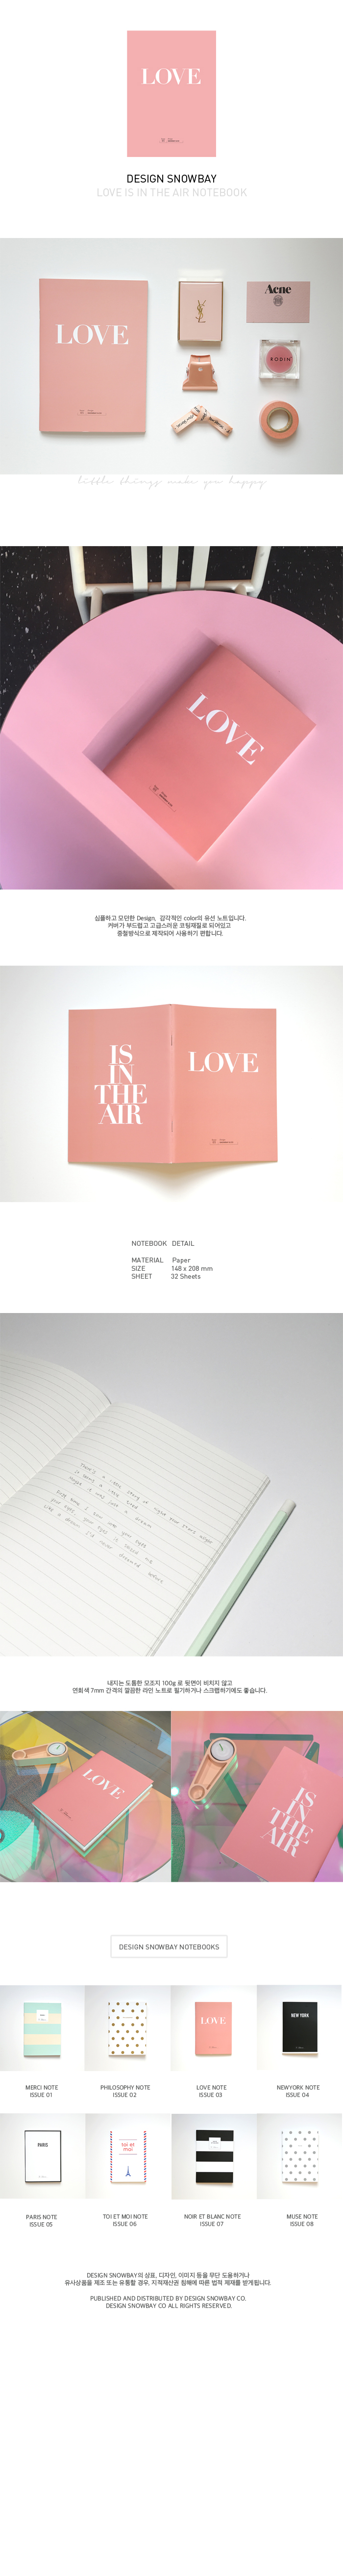 LOVE IS IN THE AIR line notebook 2,300원 - 스노우베이 디자인문구, 노트/메모, 베이직노트, 유선노트 바보사랑 LOVE IS IN THE AIR line notebook 2,300원 - 스노우베이 디자인문구, 노트/메모, 베이직노트, 유선노트 바보사랑